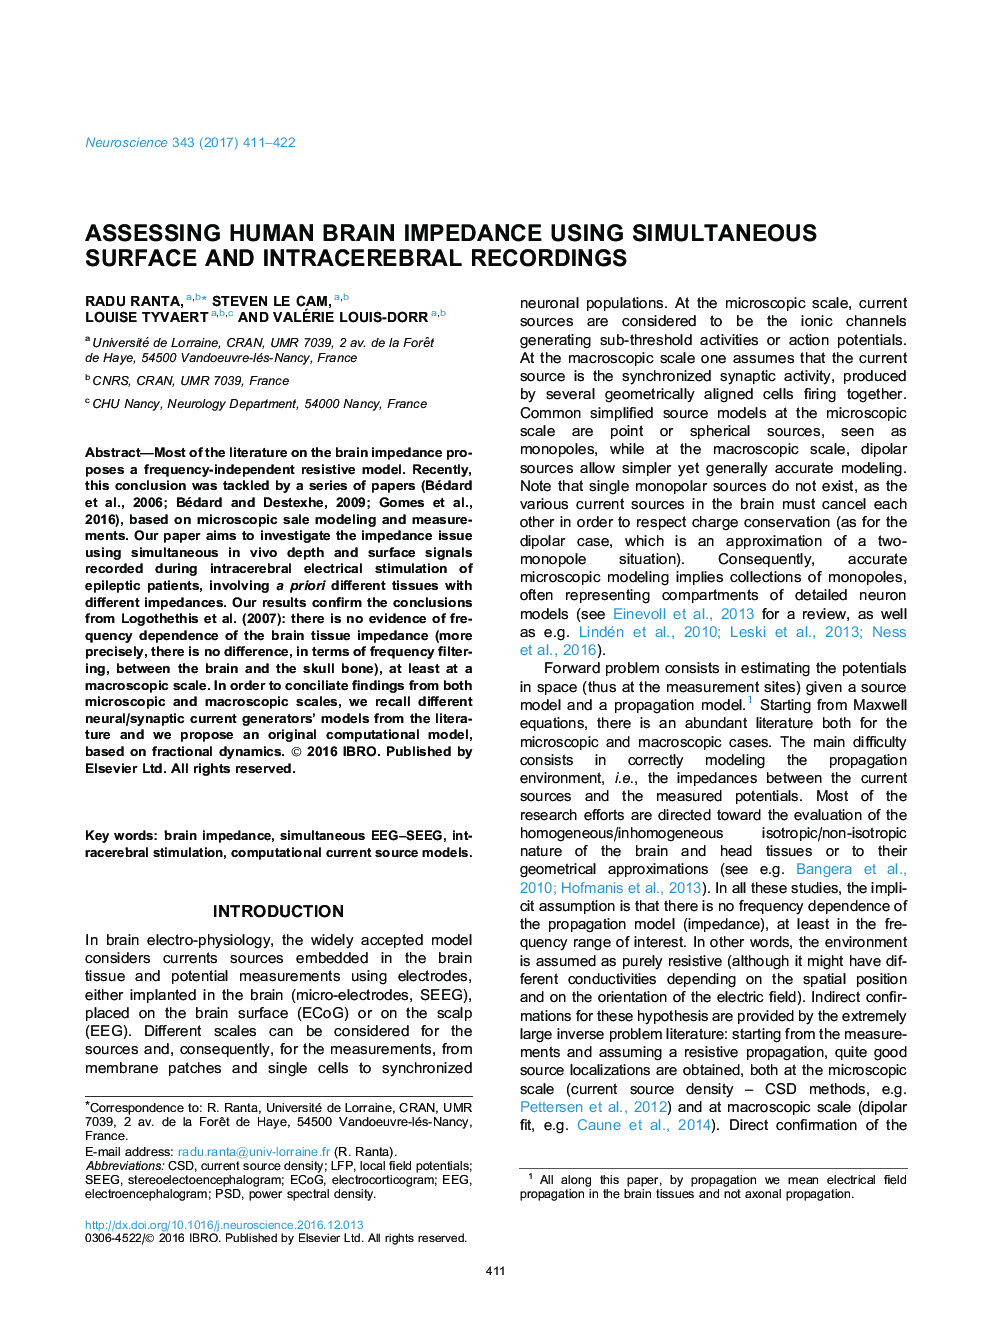 Assessing human brain impedance using simultaneous surface and intracerebral recordings